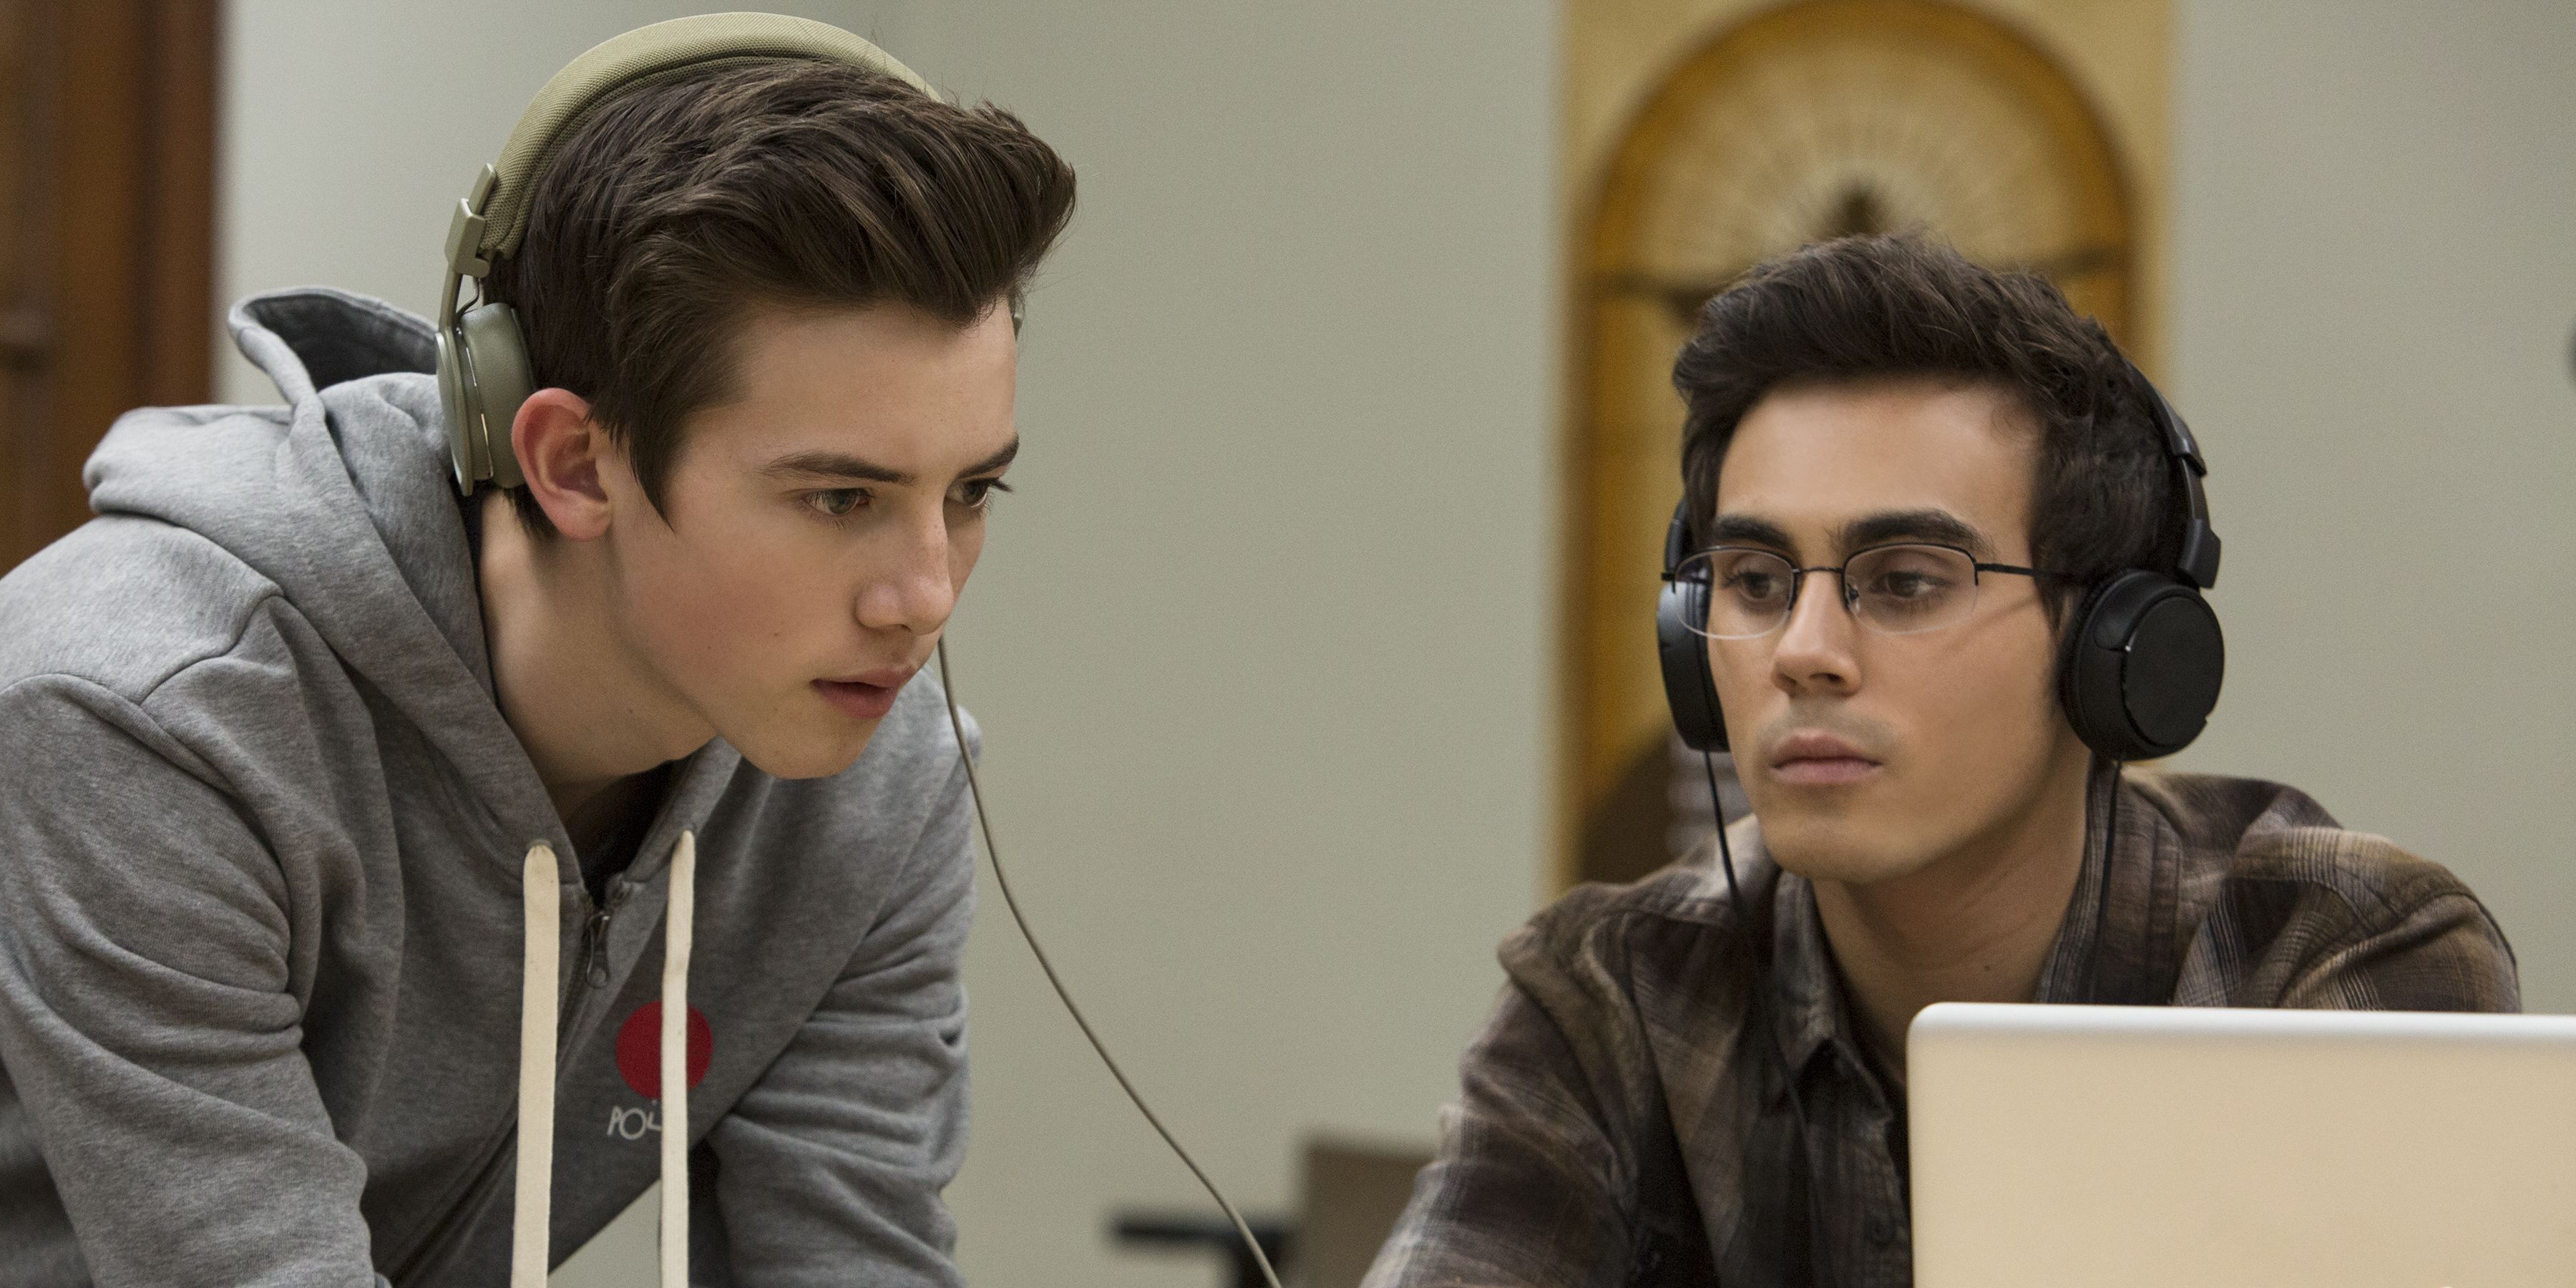 Sam and Peter from American Vandal wear headphones and look at something on a laptop